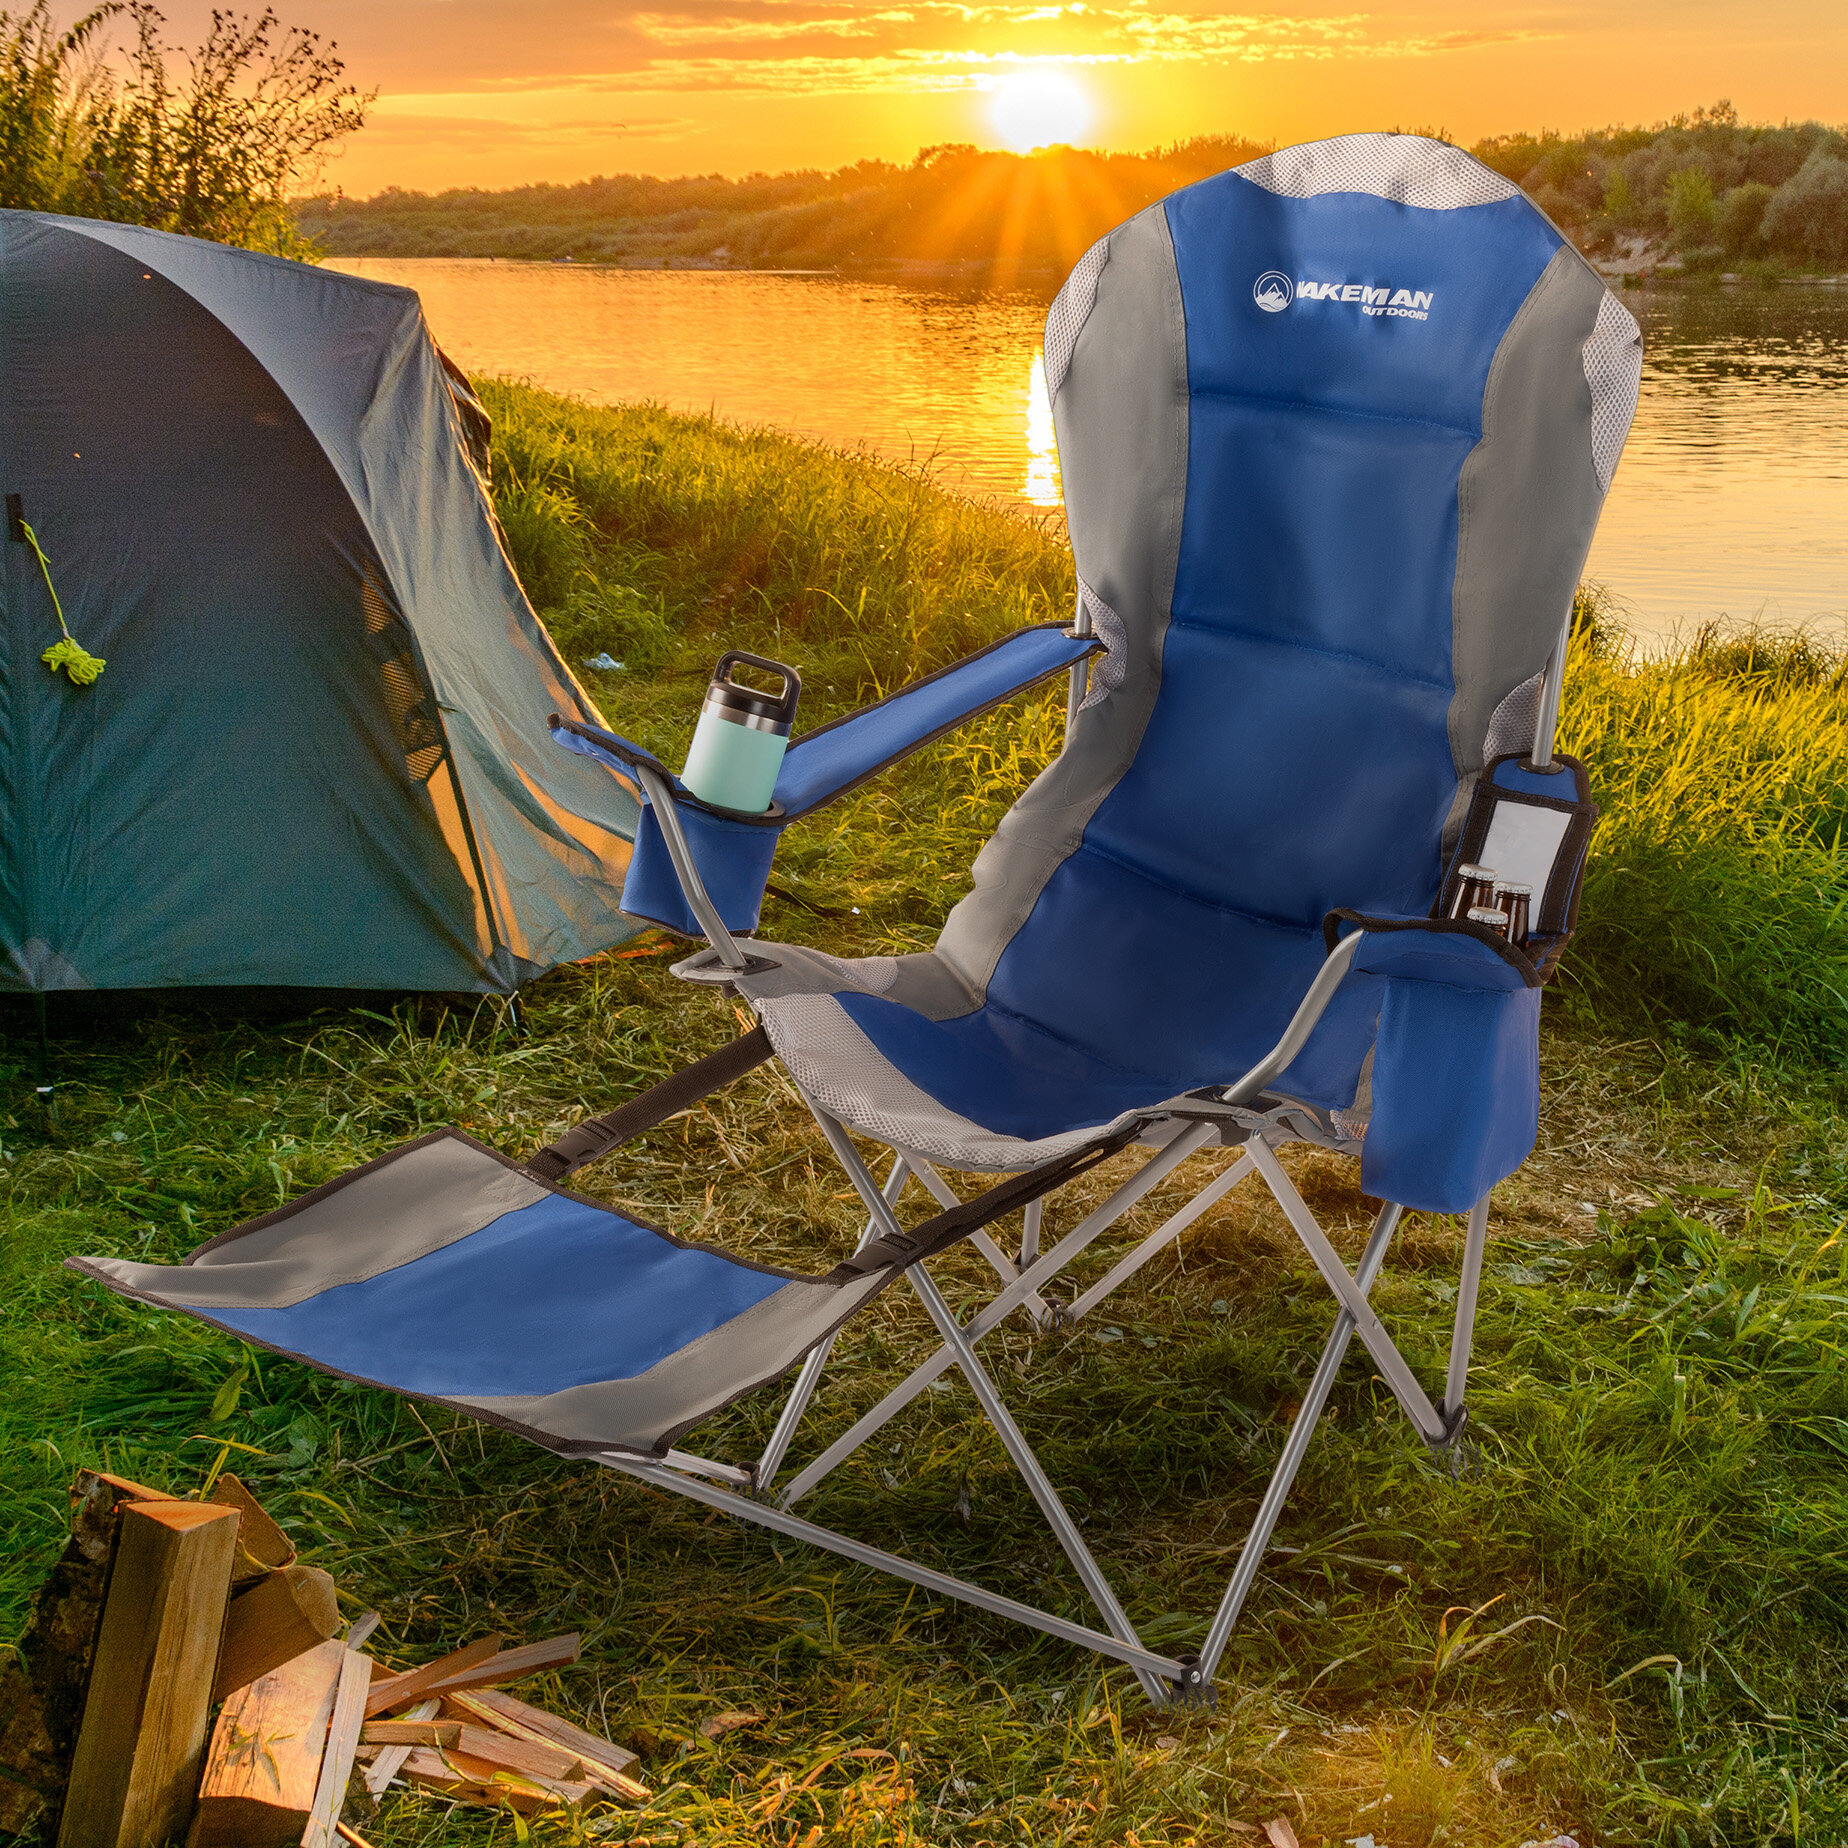 Best Heavy Duty Camping Chairs - Buying Reviews 2021